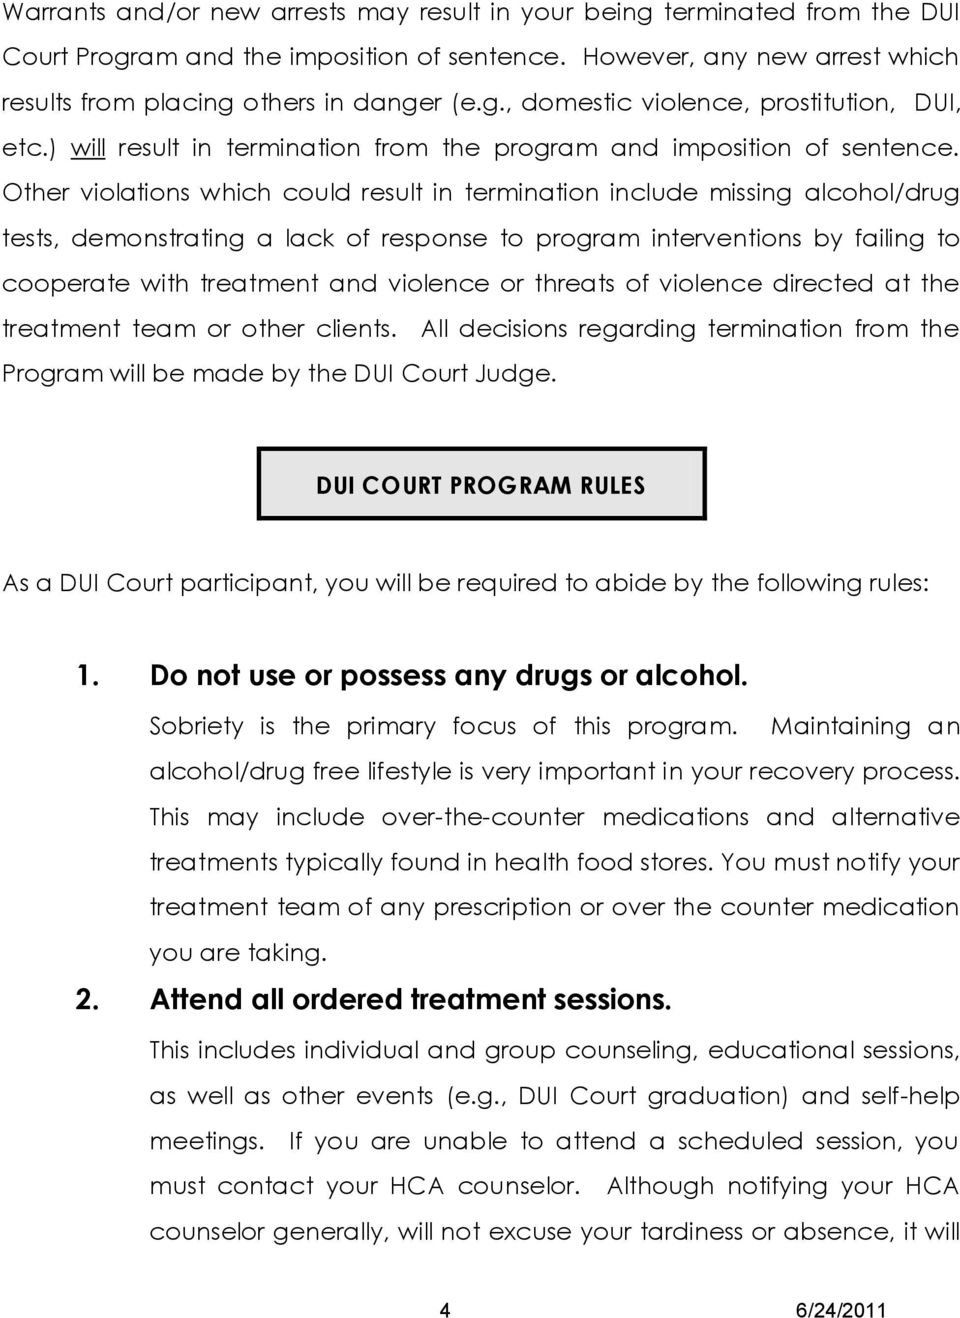 Other violations which could result in termination include missing alcohol/drug tests, demonstrating a lack of response to program interventions by failing to cooperate with treatment and violence or